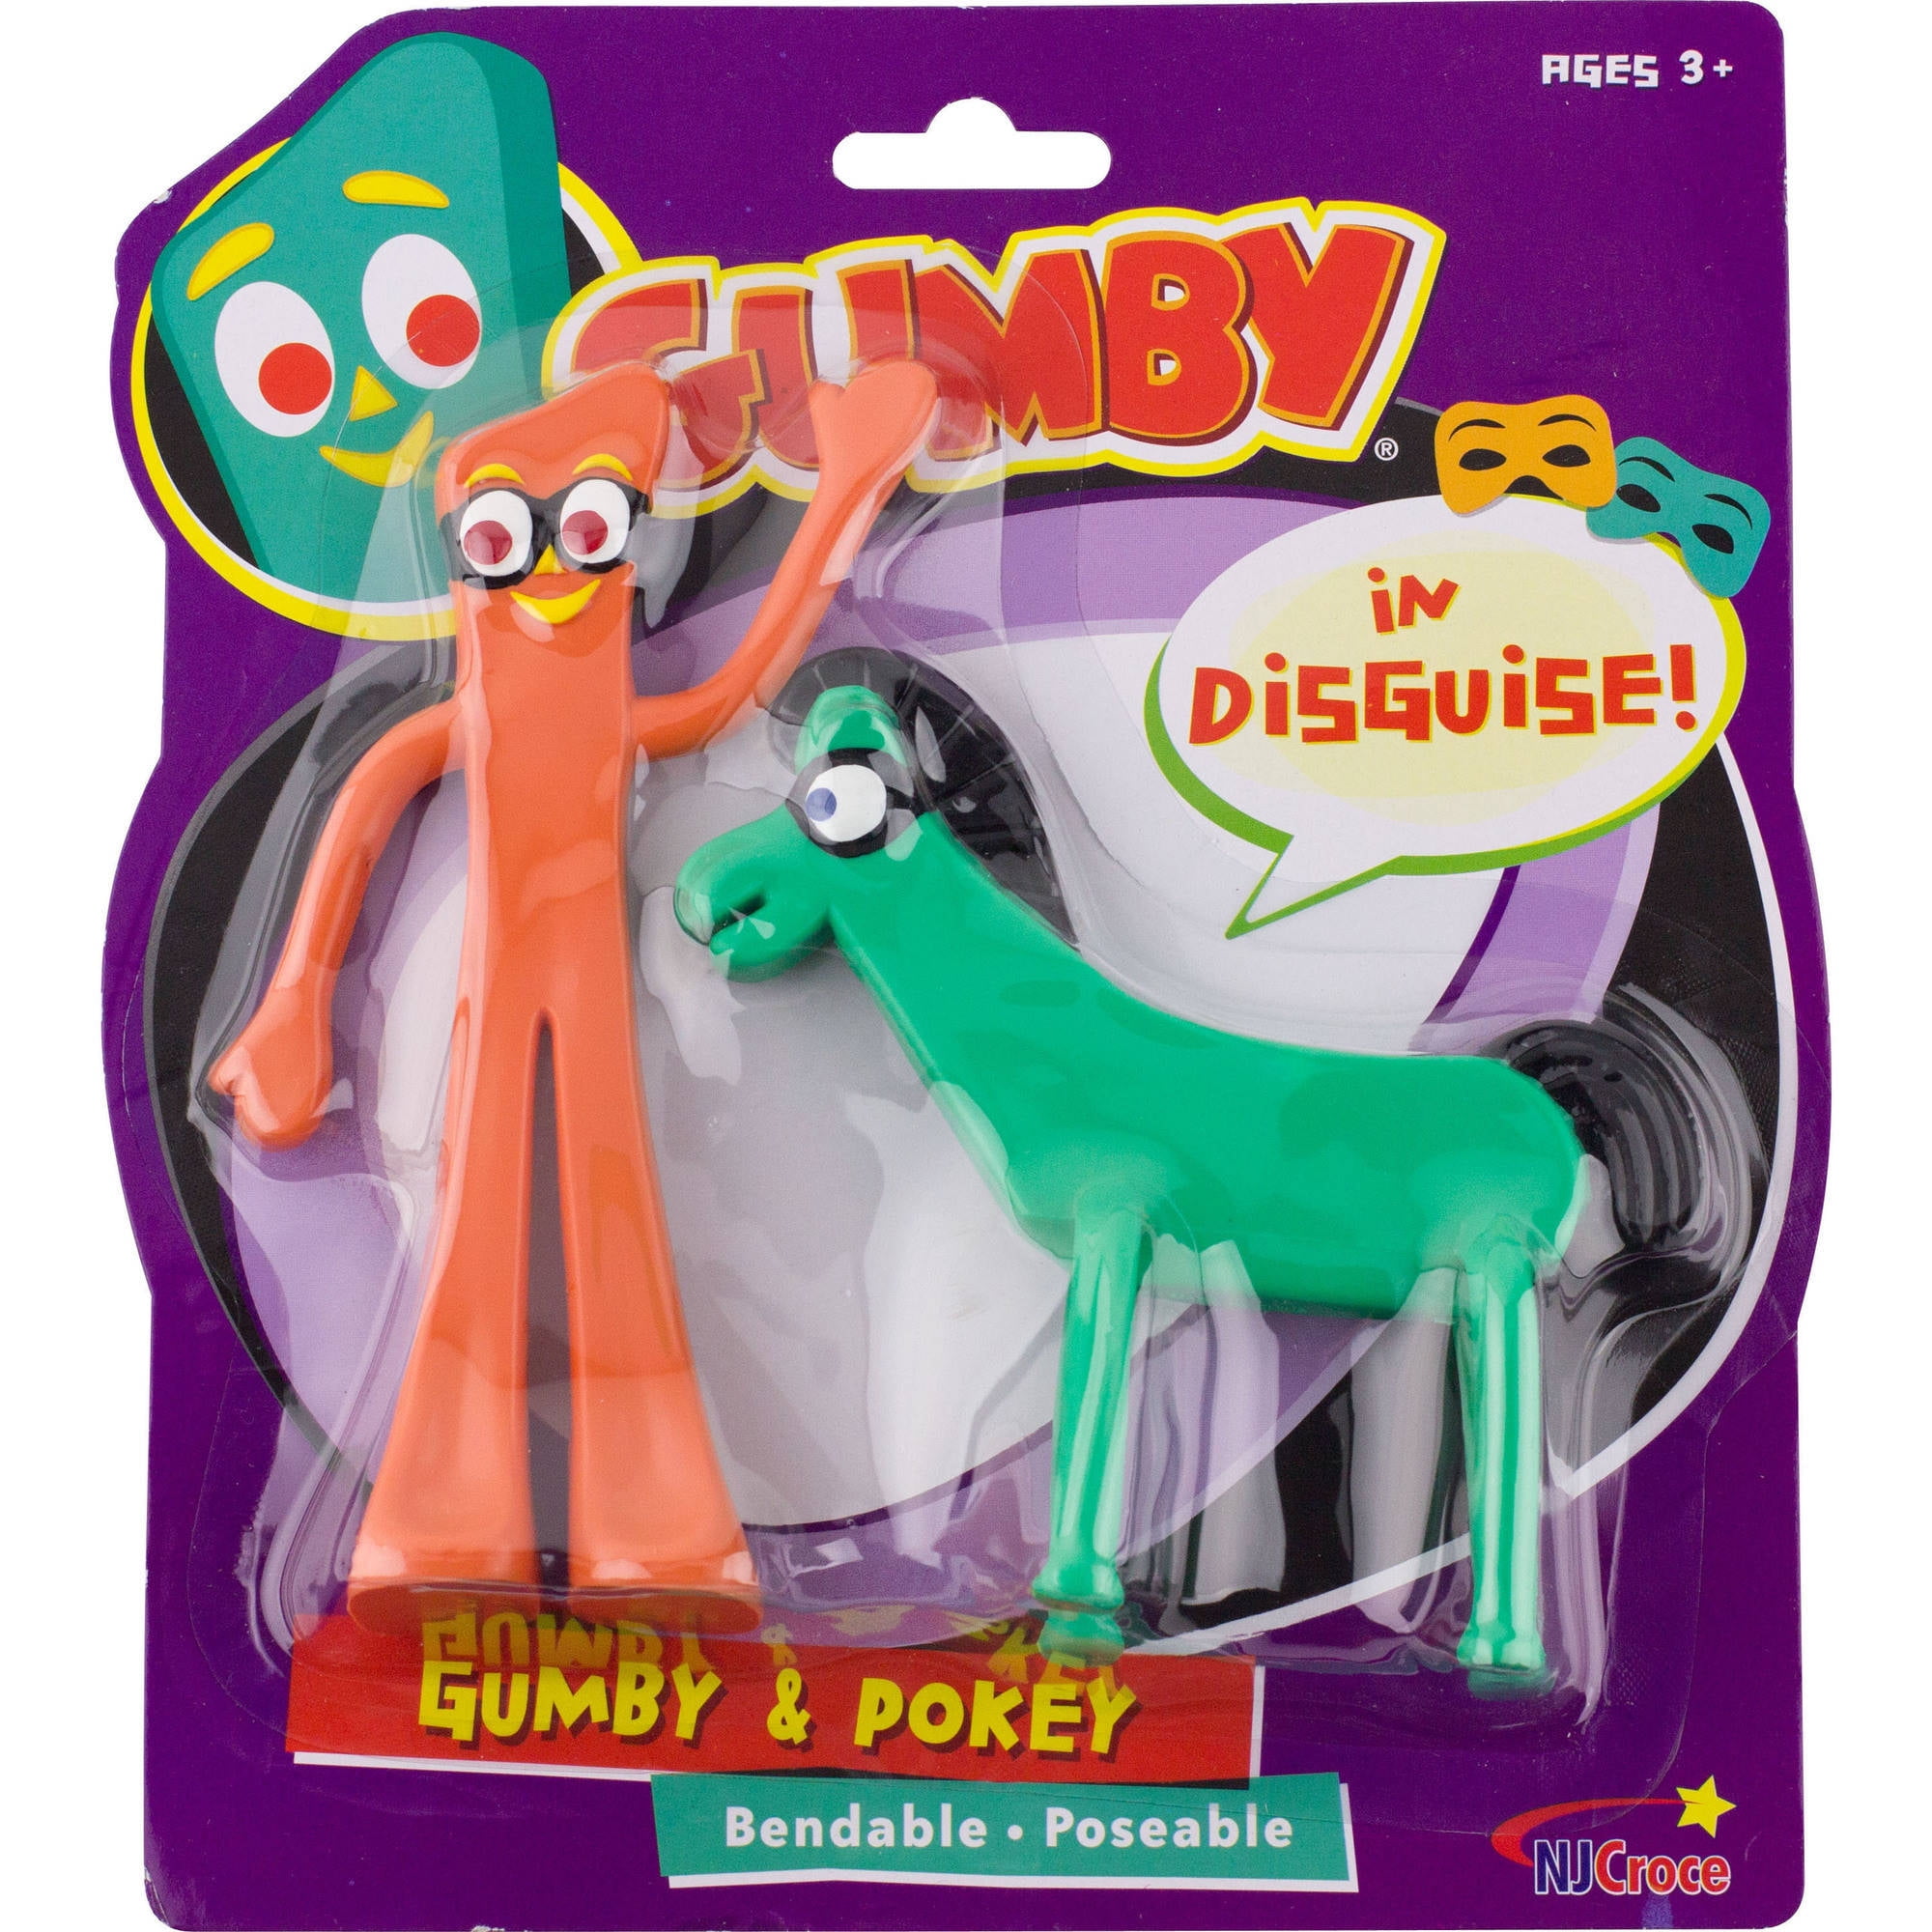 POKEY The Original Bendable Gumby Figure 5 1/2" Kids Toy Action Figure Classic 